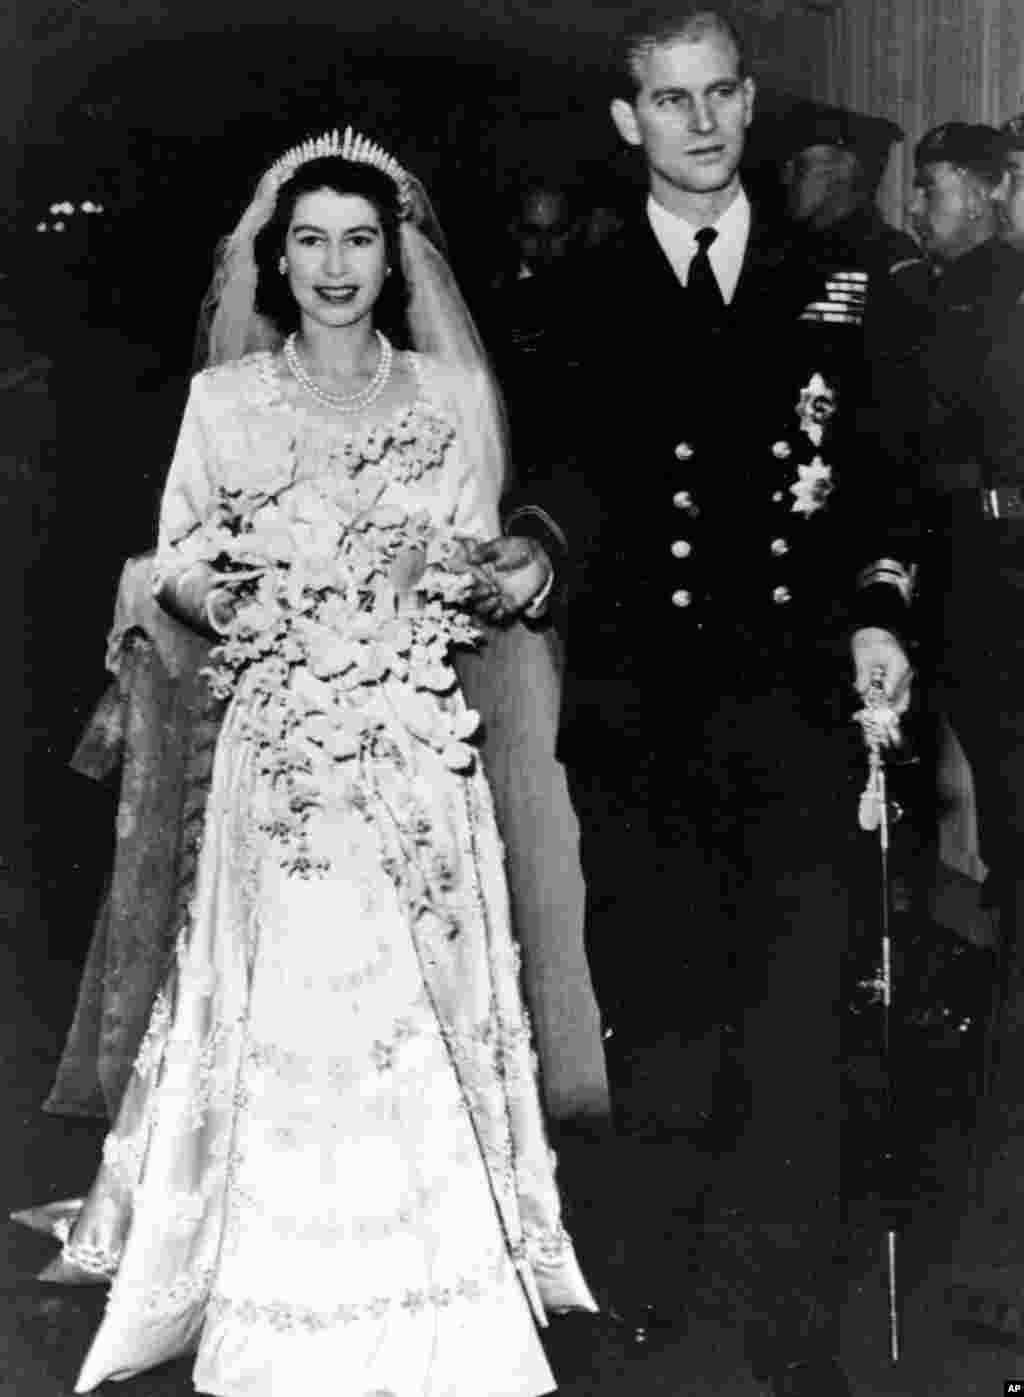 Princess Elizabeth leaves Westminster Abbey in London, with her husband, the Duke of Edinburgh, after their wedding ceremony, Nov. 20, 1947.